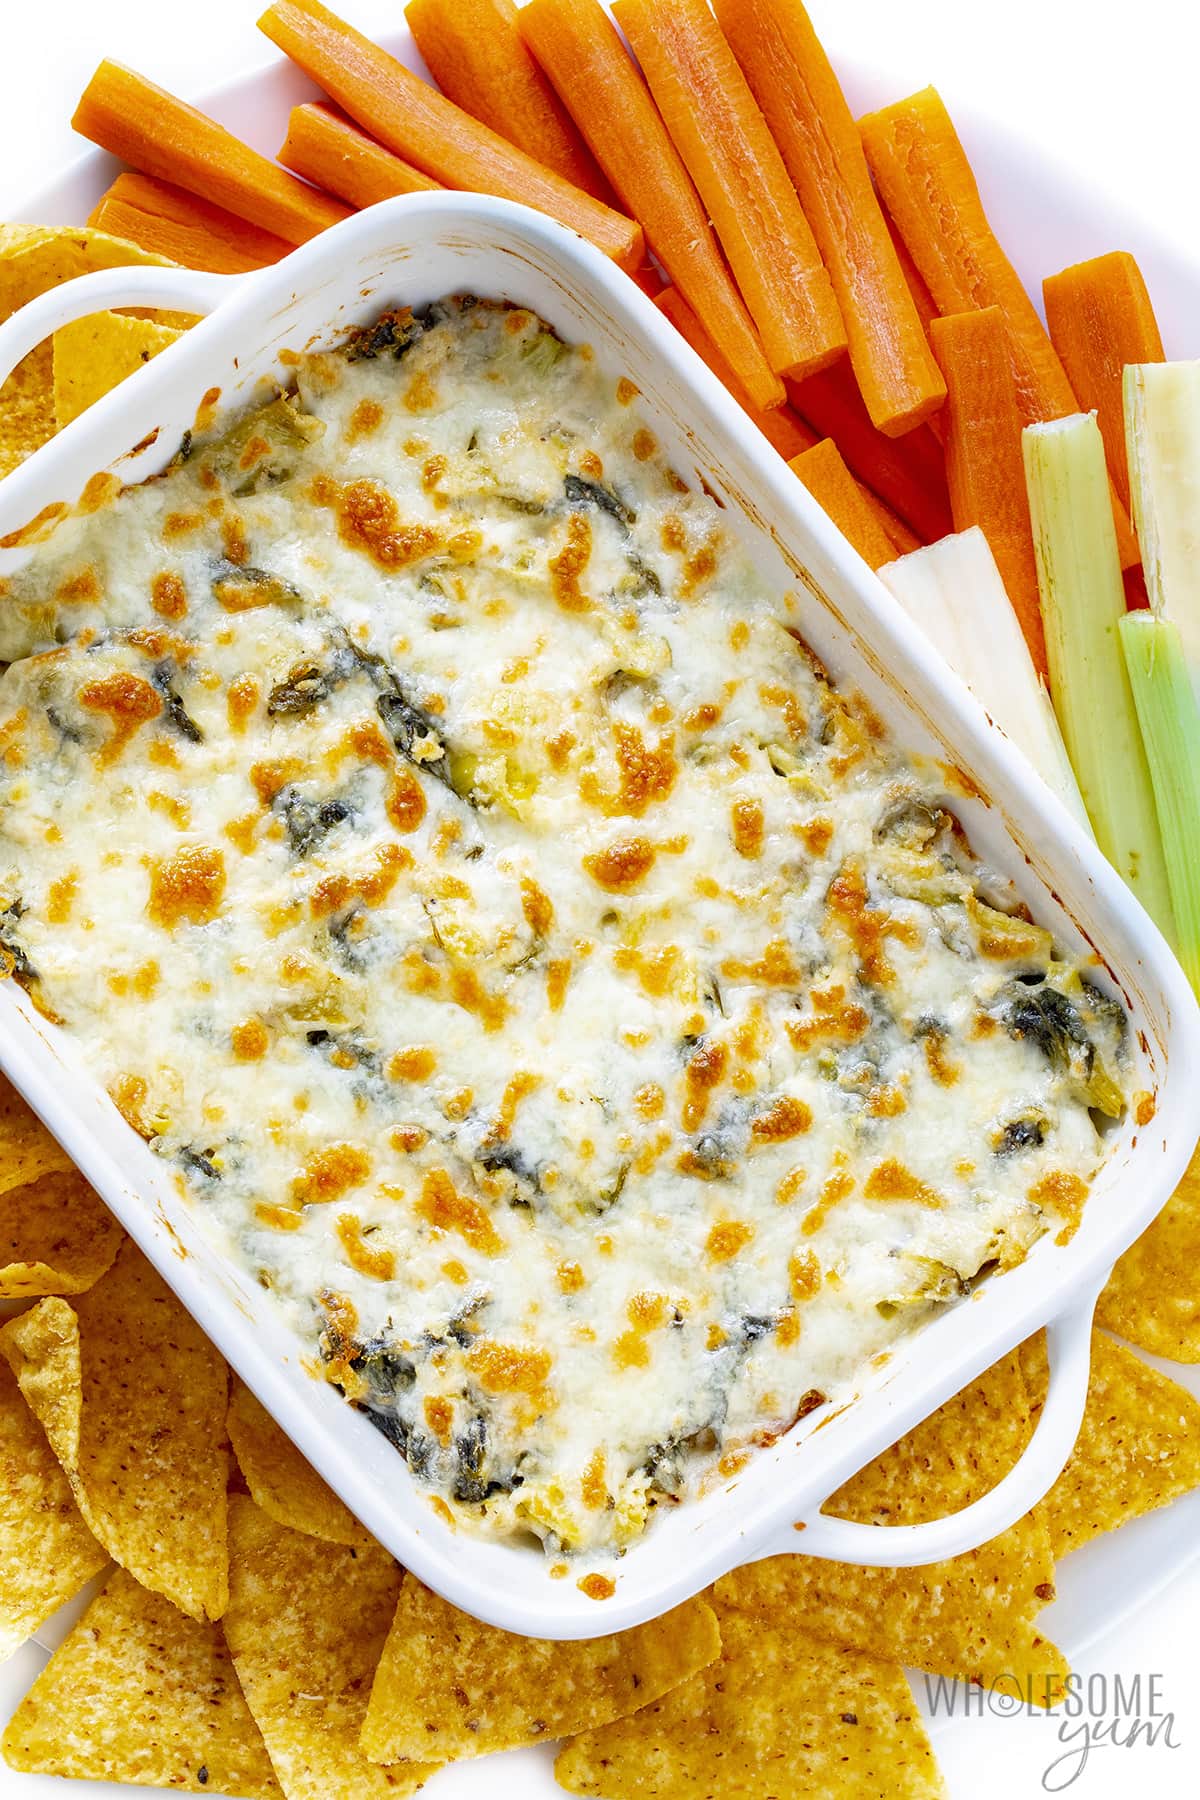 Baked spinach artichoke dip surrounded by carrots, celery, and tortilla chips.